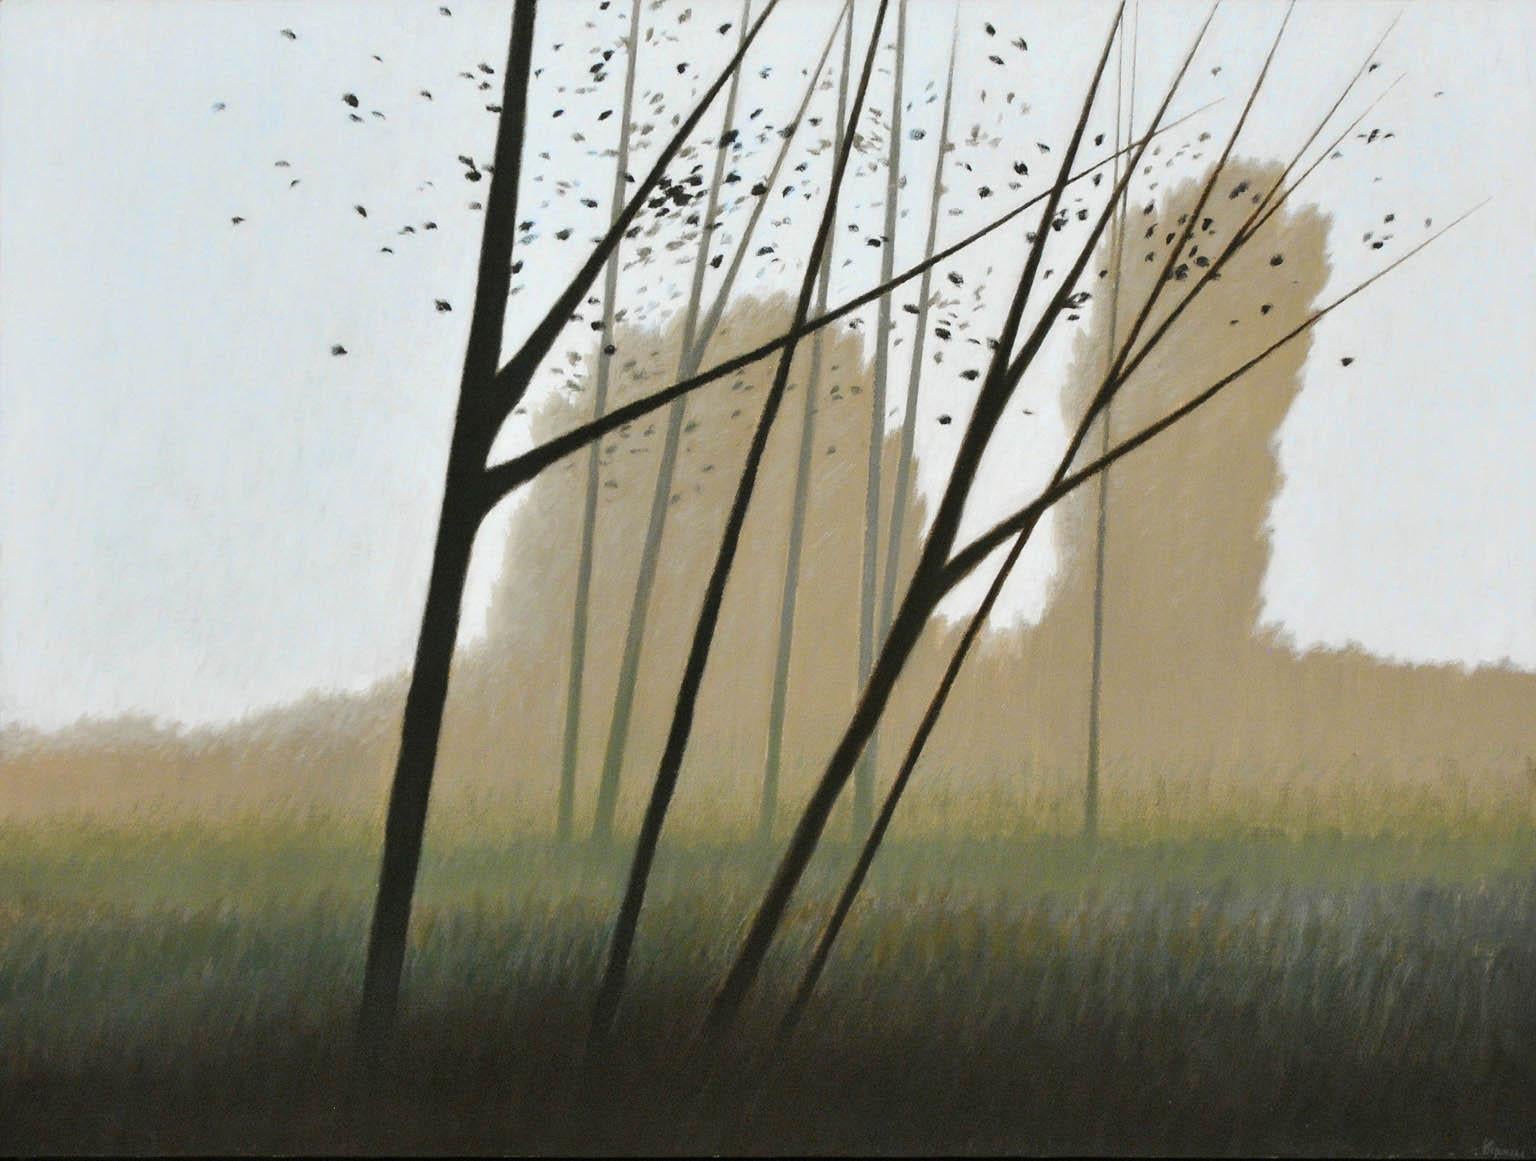 And on the hill, two trees - Painting by Robert Kipniss